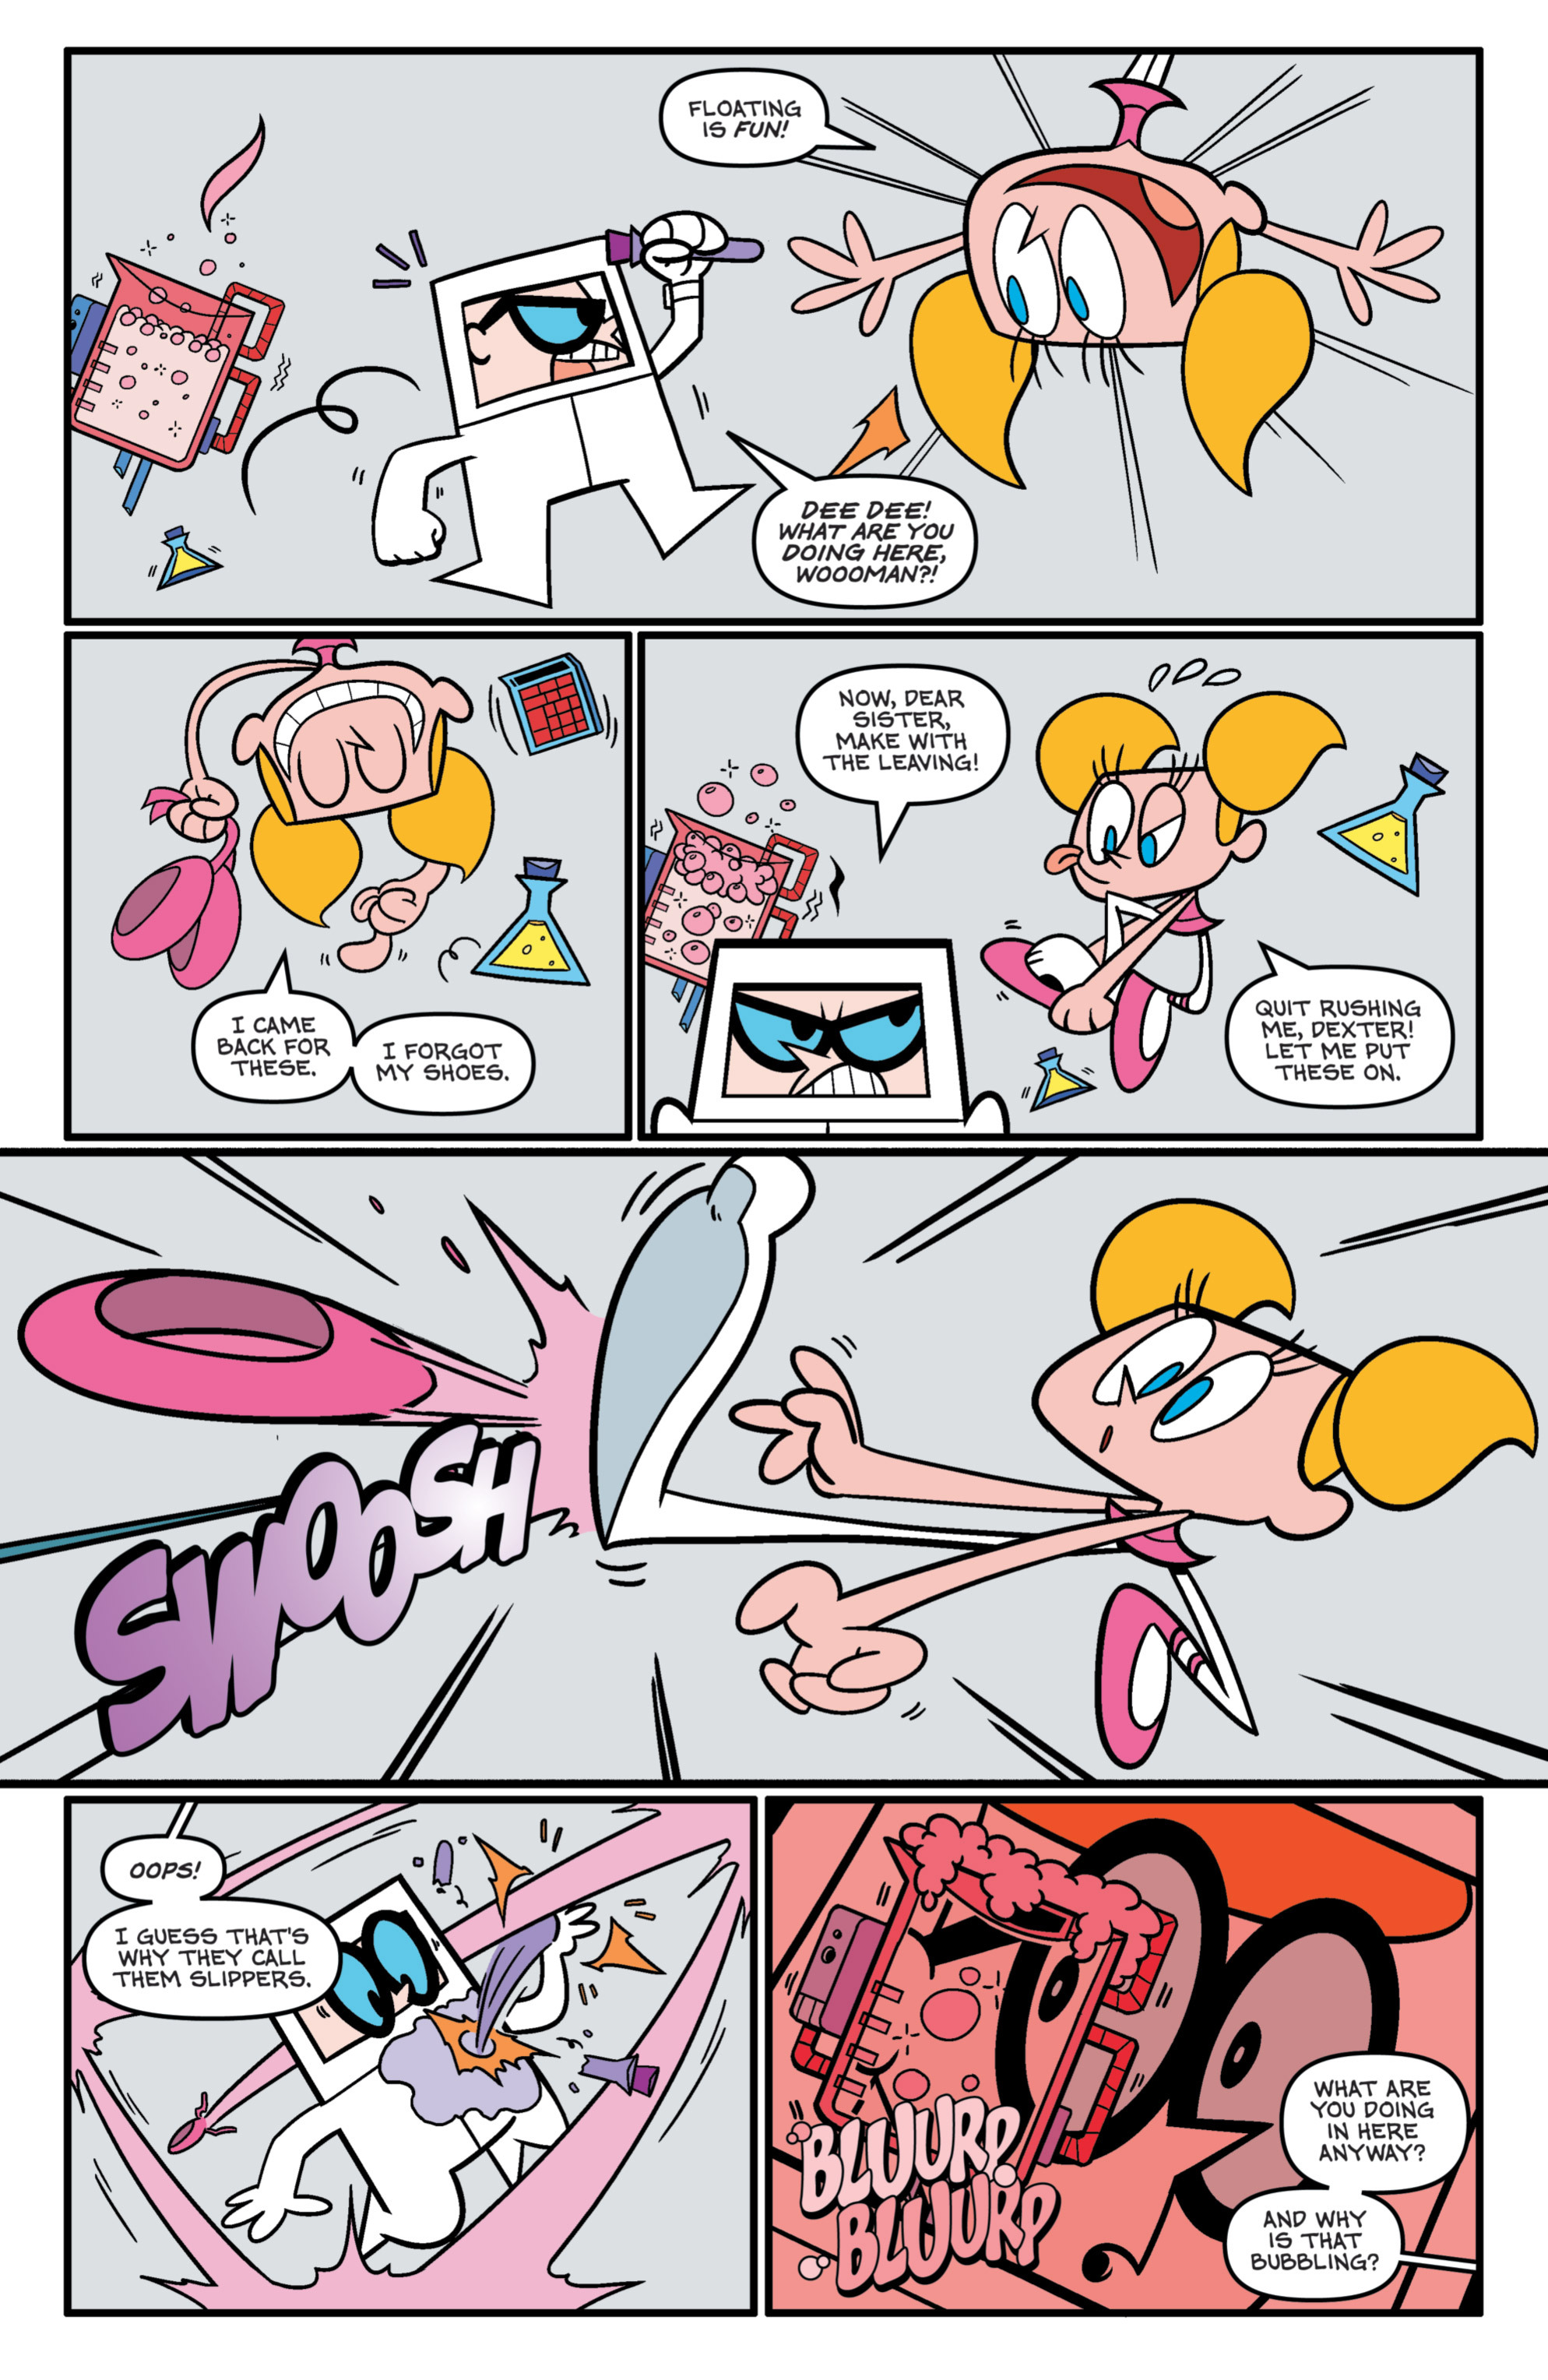 Dexter S Laboratory 2014 Issue 1 Read Dexter S Laboratory 2014 Issue